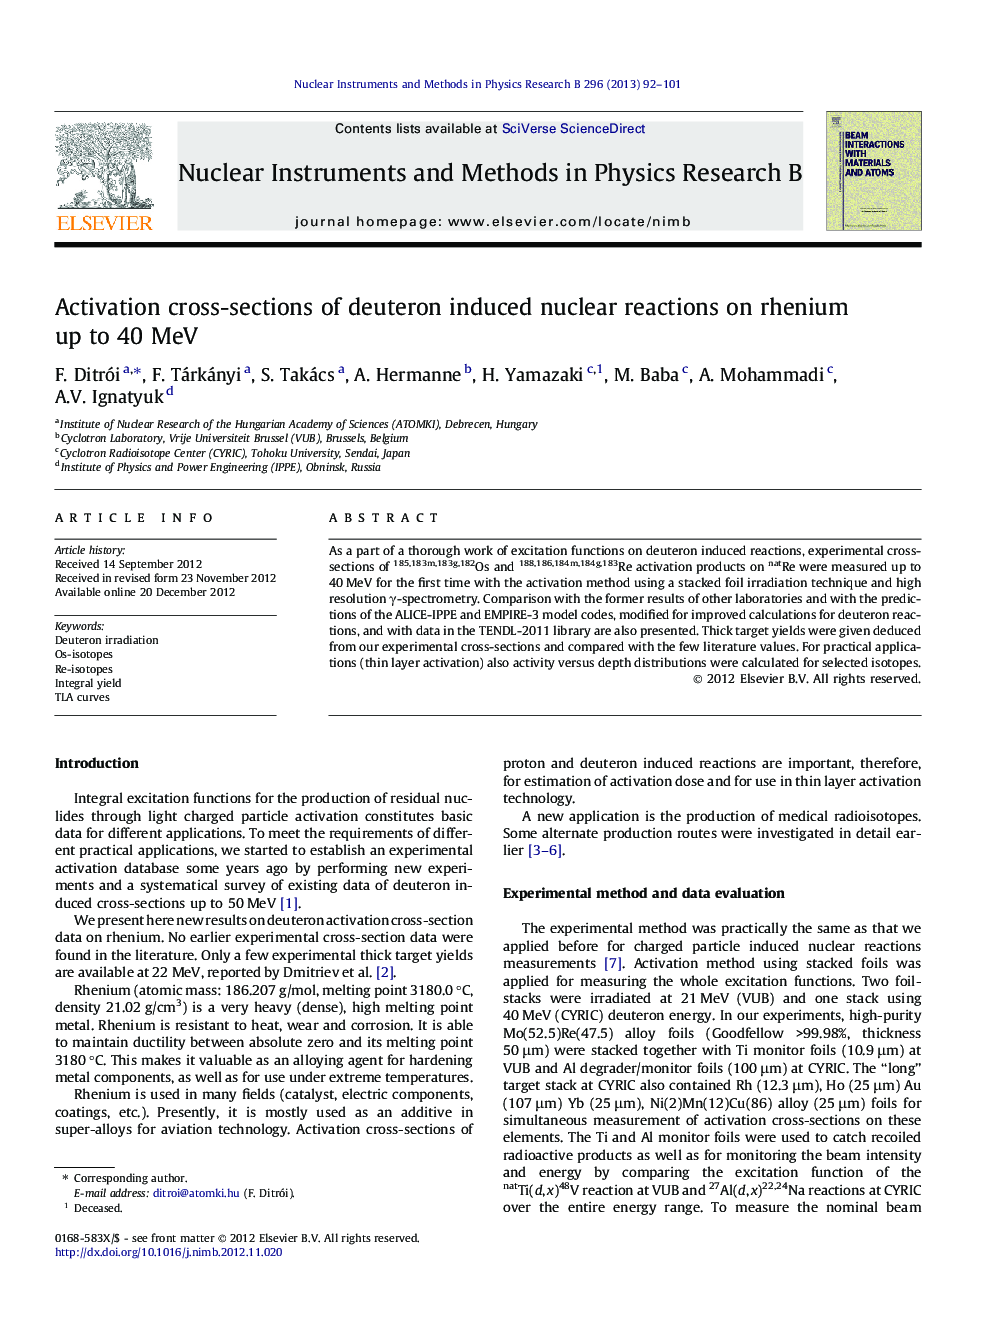 Activation cross-sections of deuteron induced nuclear reactions on rhenium up to 40 MeV